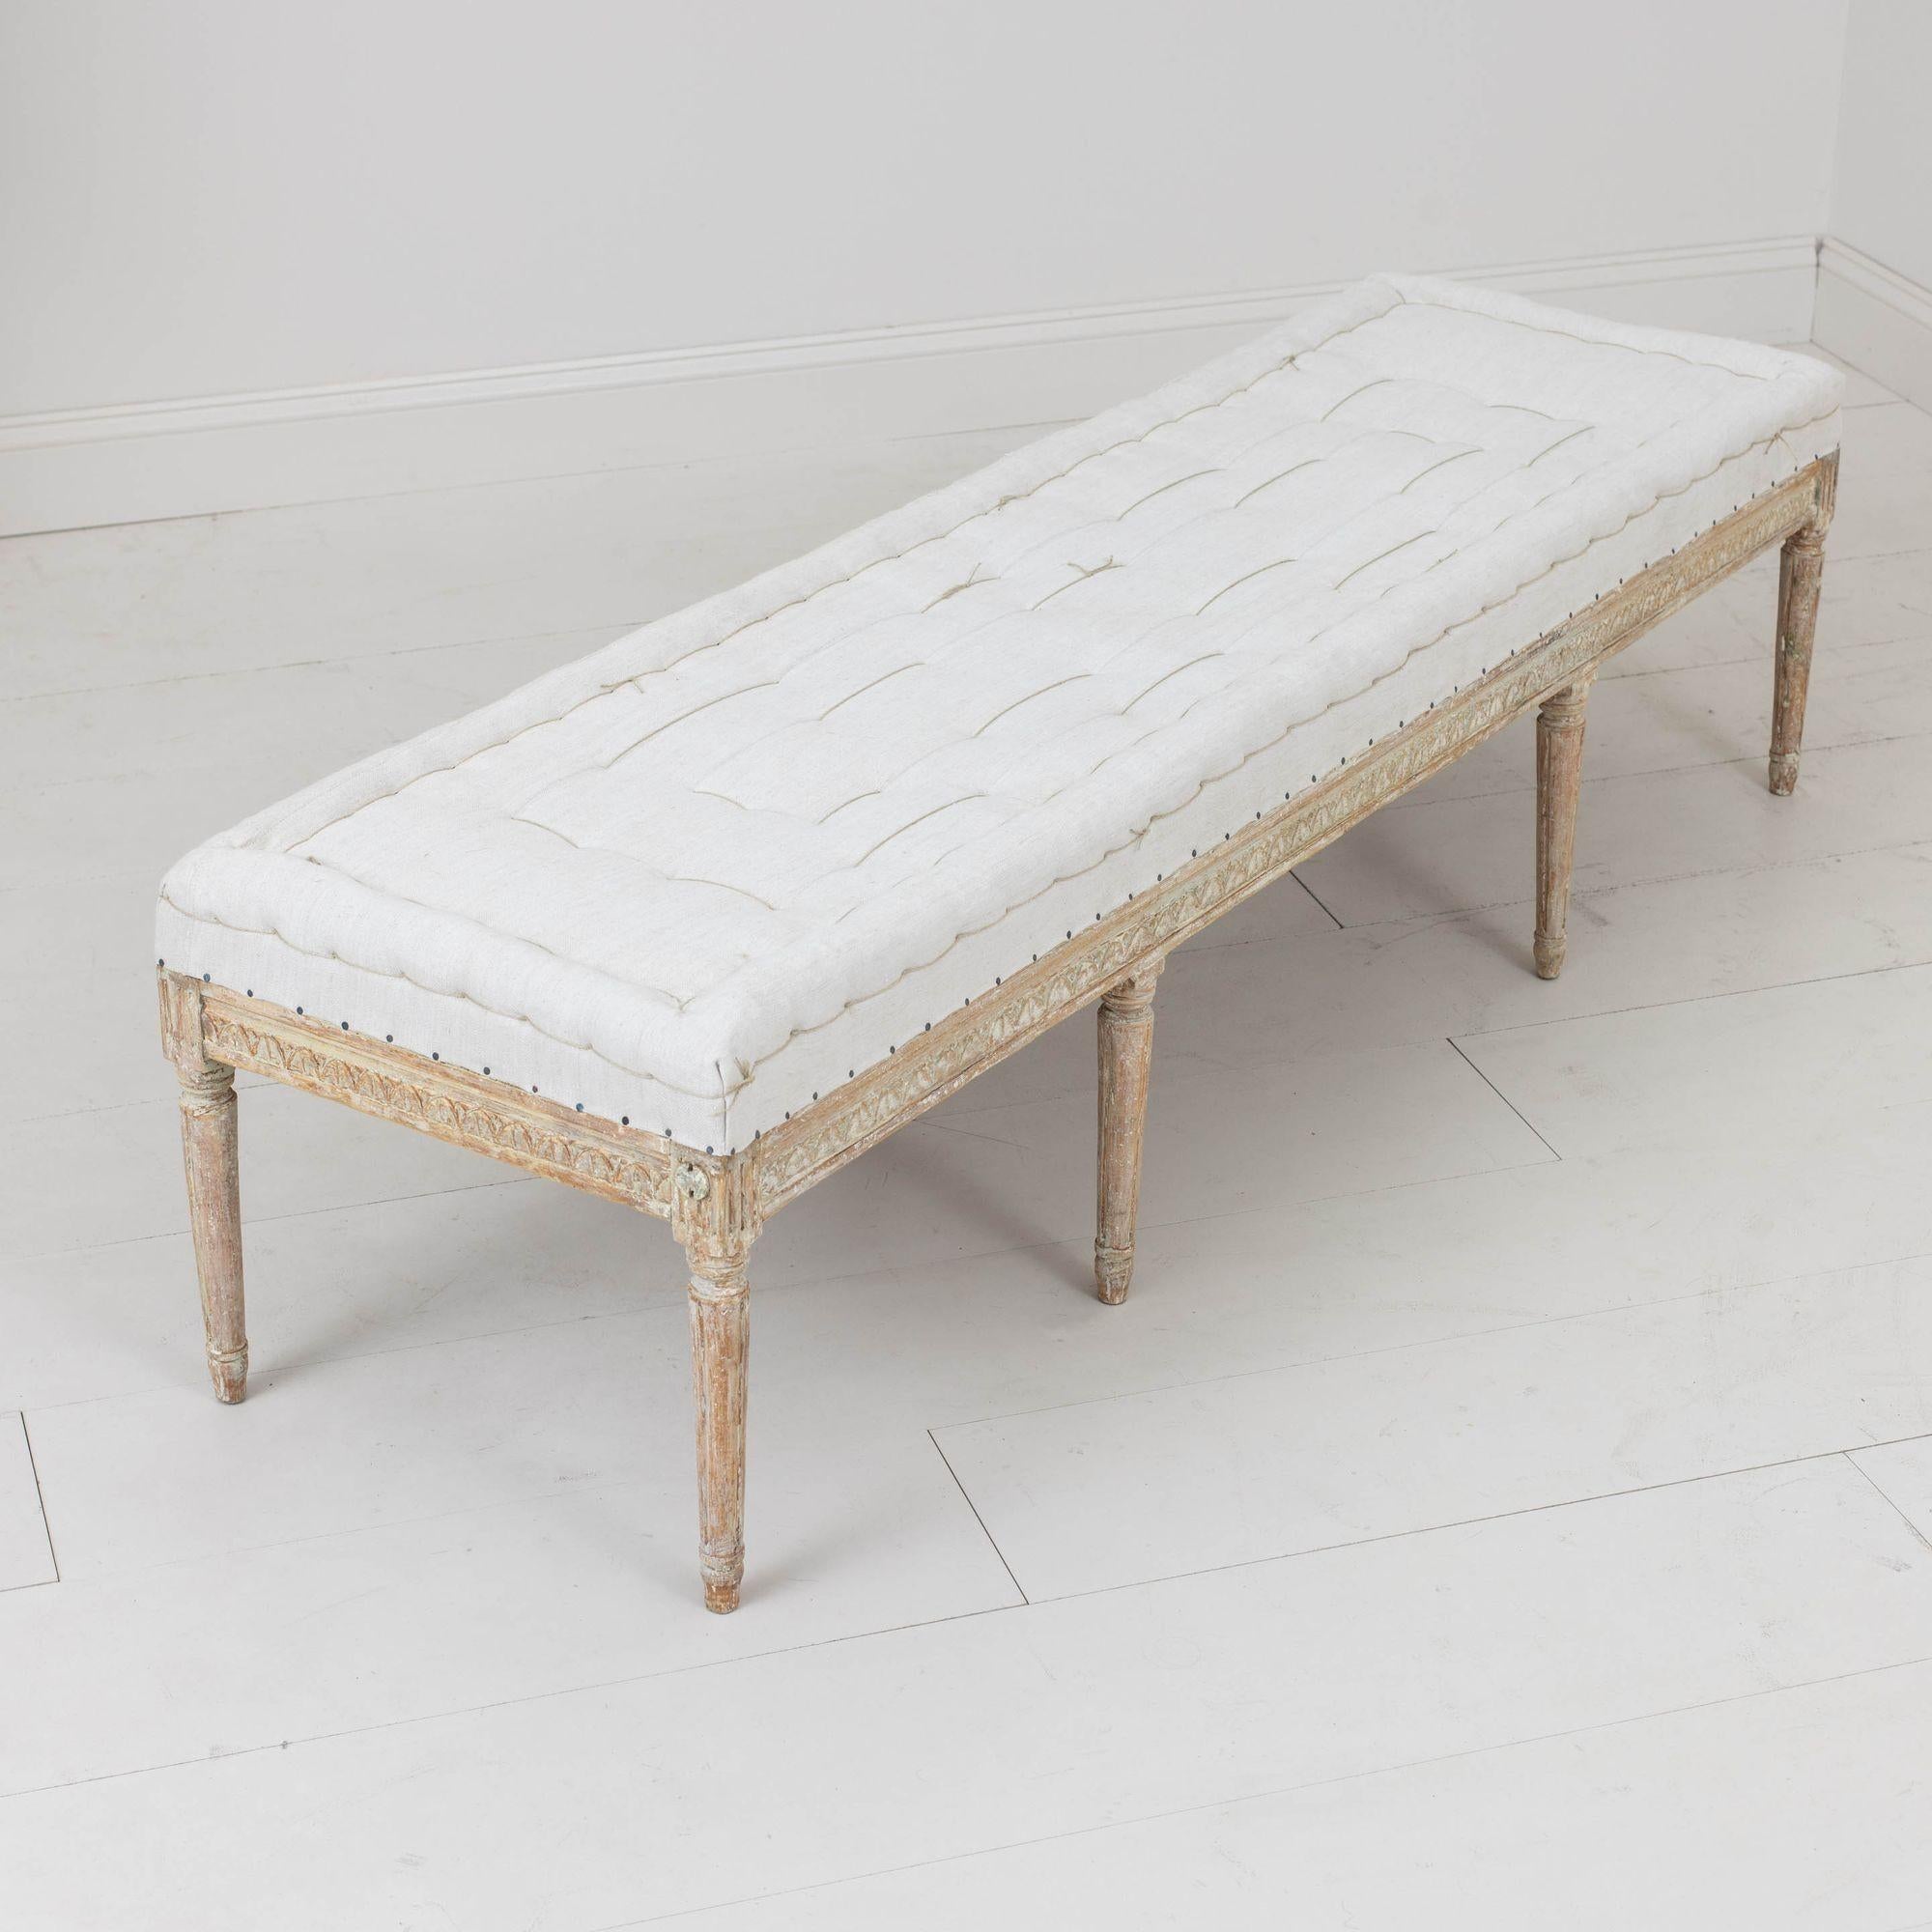 19th Century 19th c. Swedish Gustavian Period Bench or Footstool in Original Paint